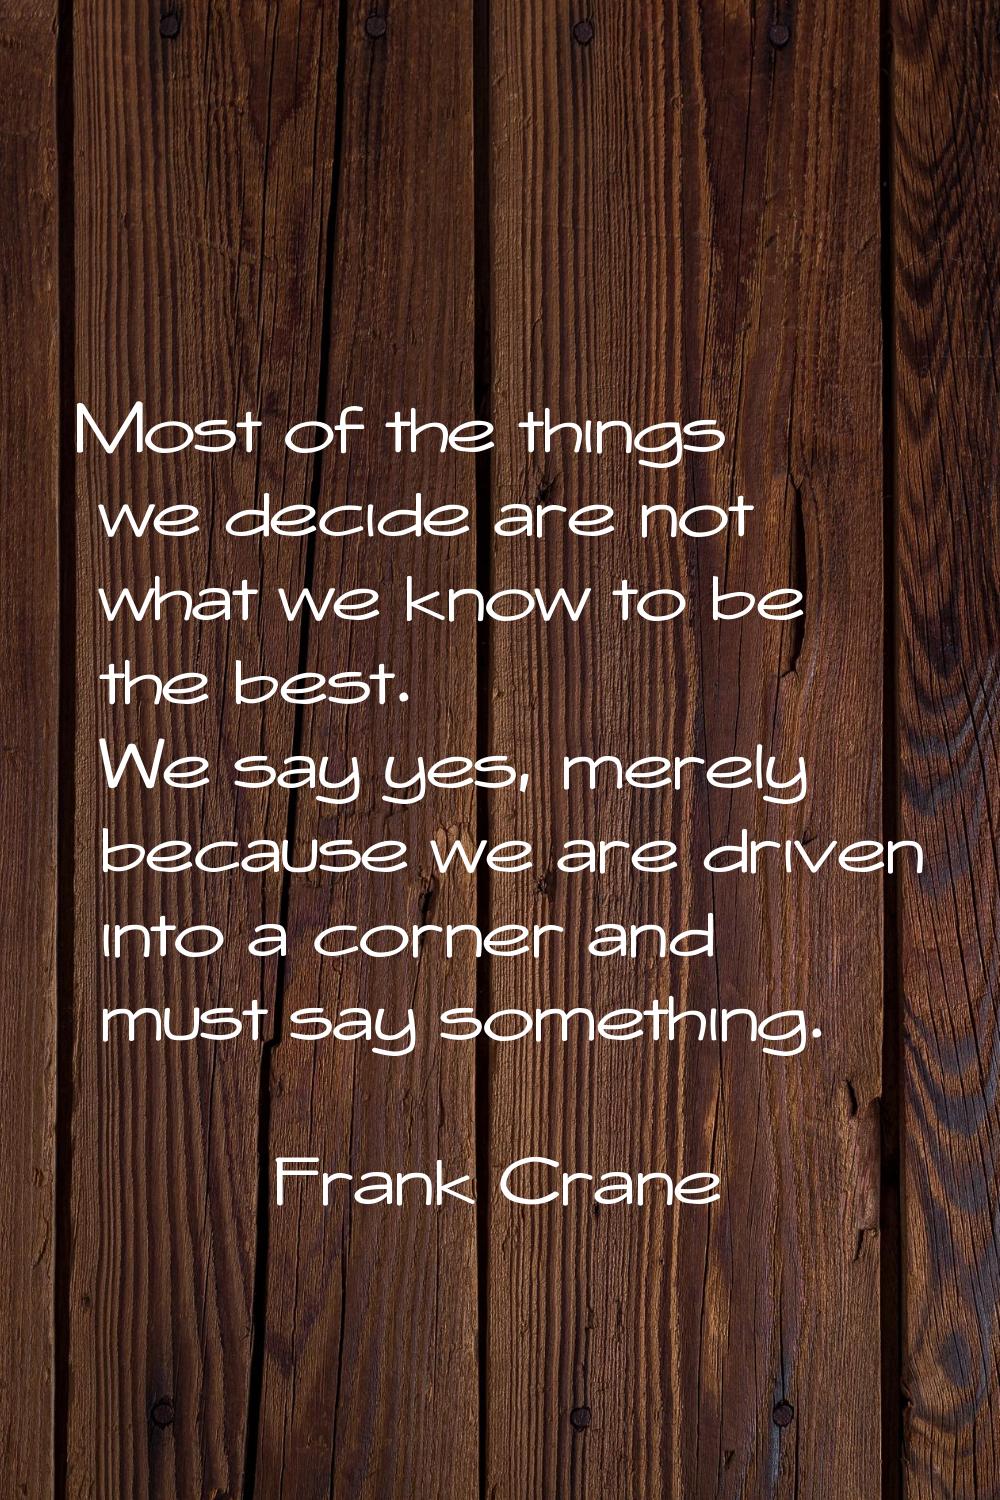 Most of the things we decide are not what we know to be the best. We say yes, merely because we are